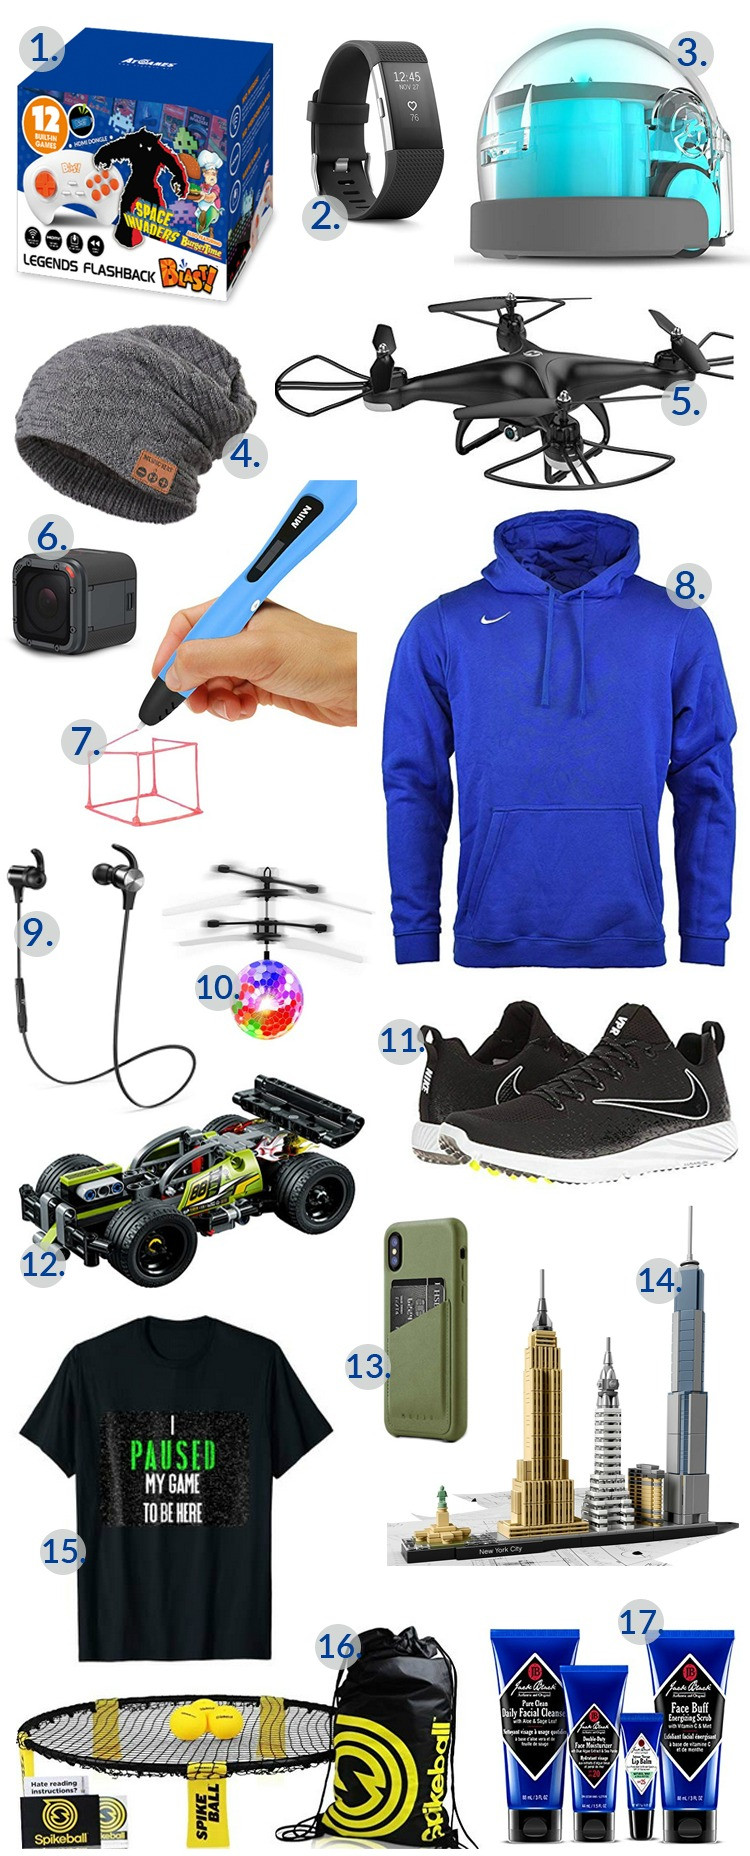 Great Gift Ideas For Boys
 17 Top Gift Ideas for Teen Boys on Your Shopping List